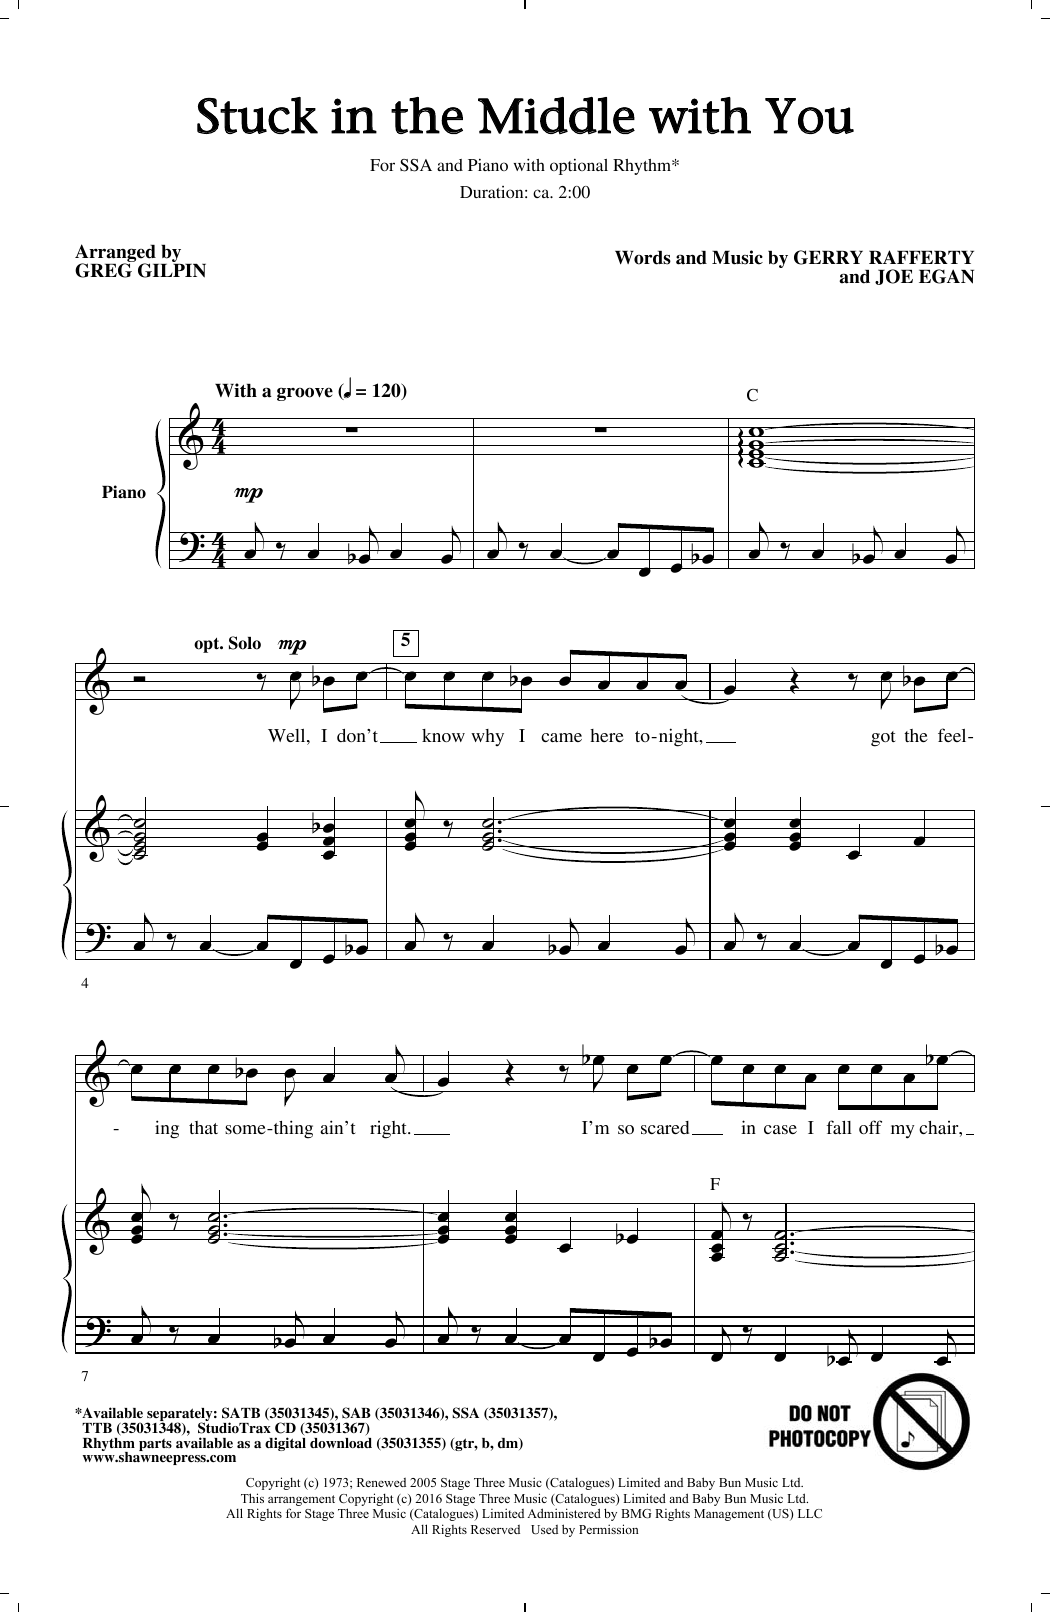 Download Greg Gilpin Stuck In The Middle With You Sheet Music